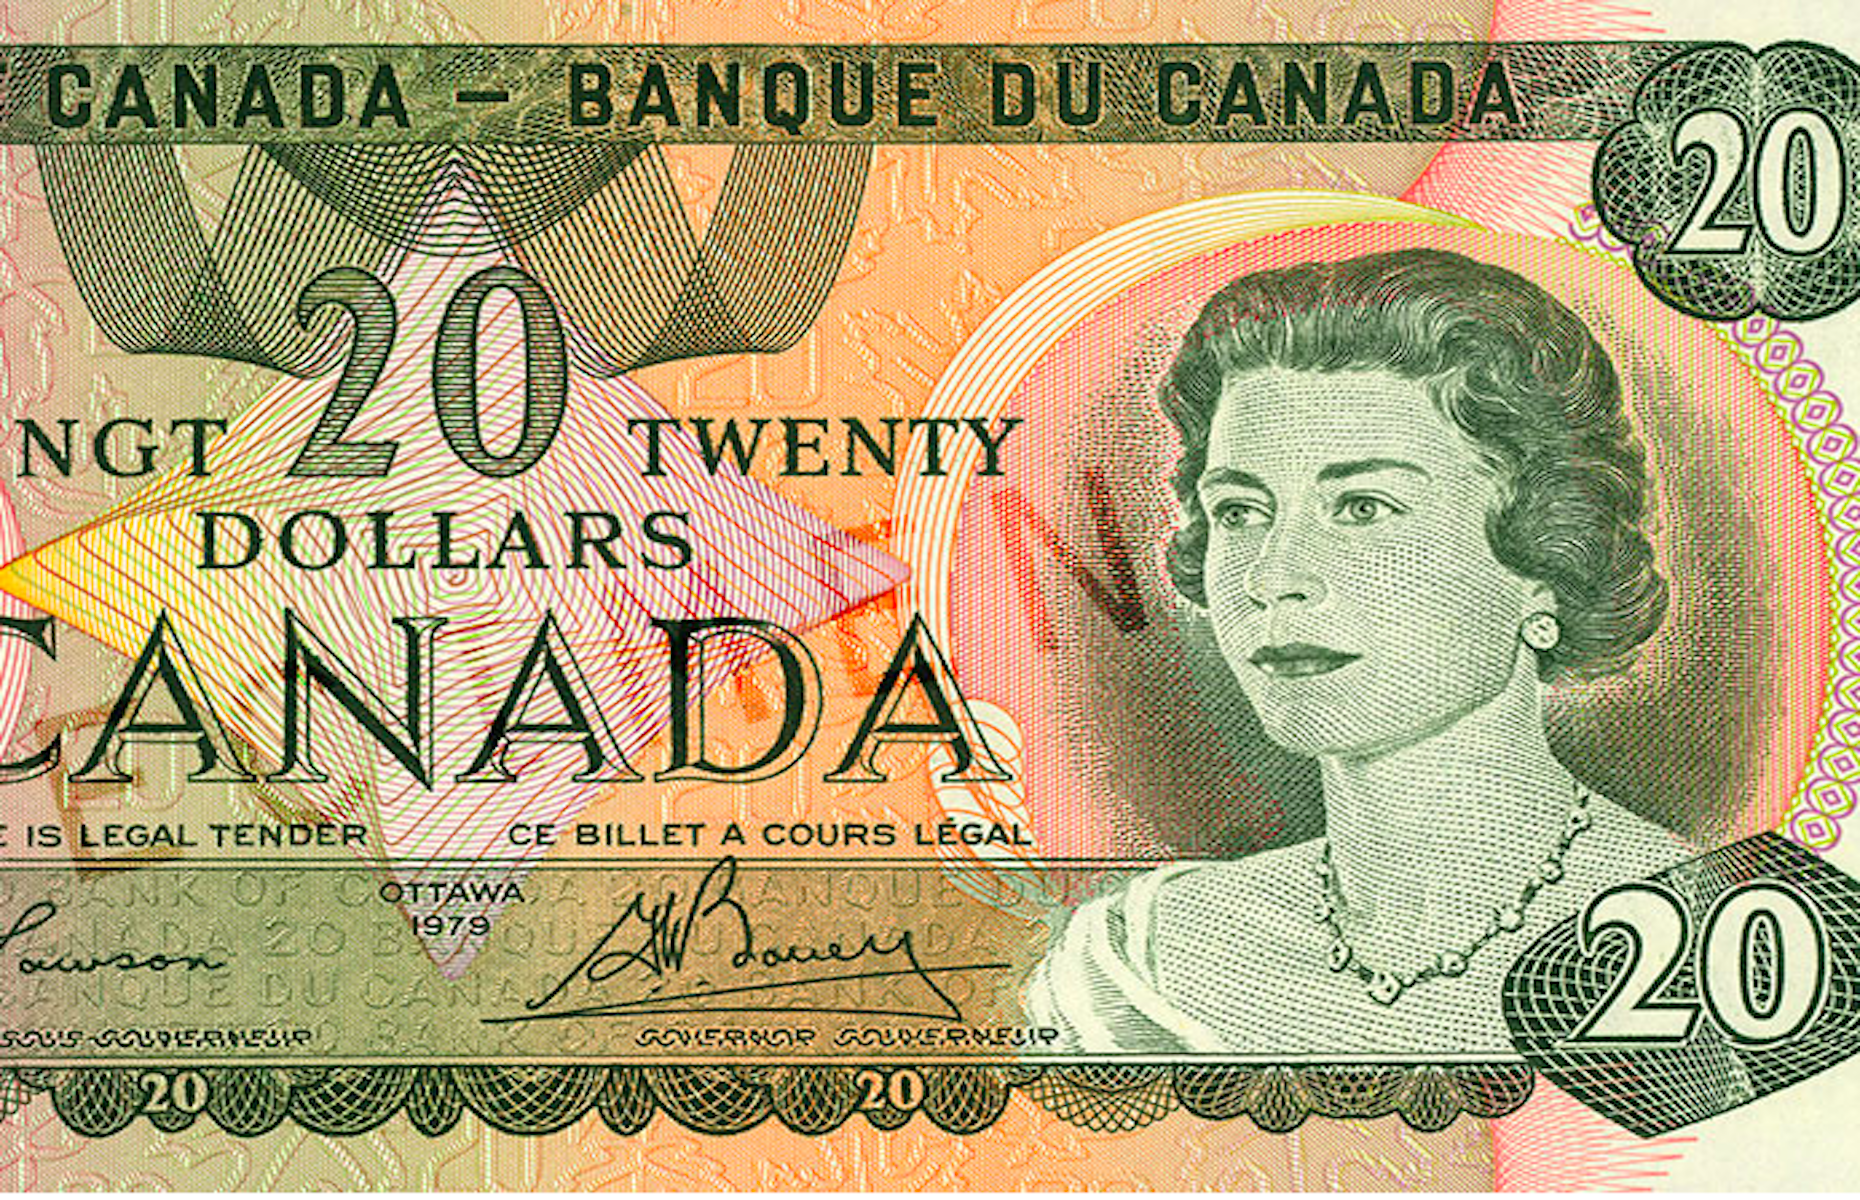 Canadian $20 note (1970)